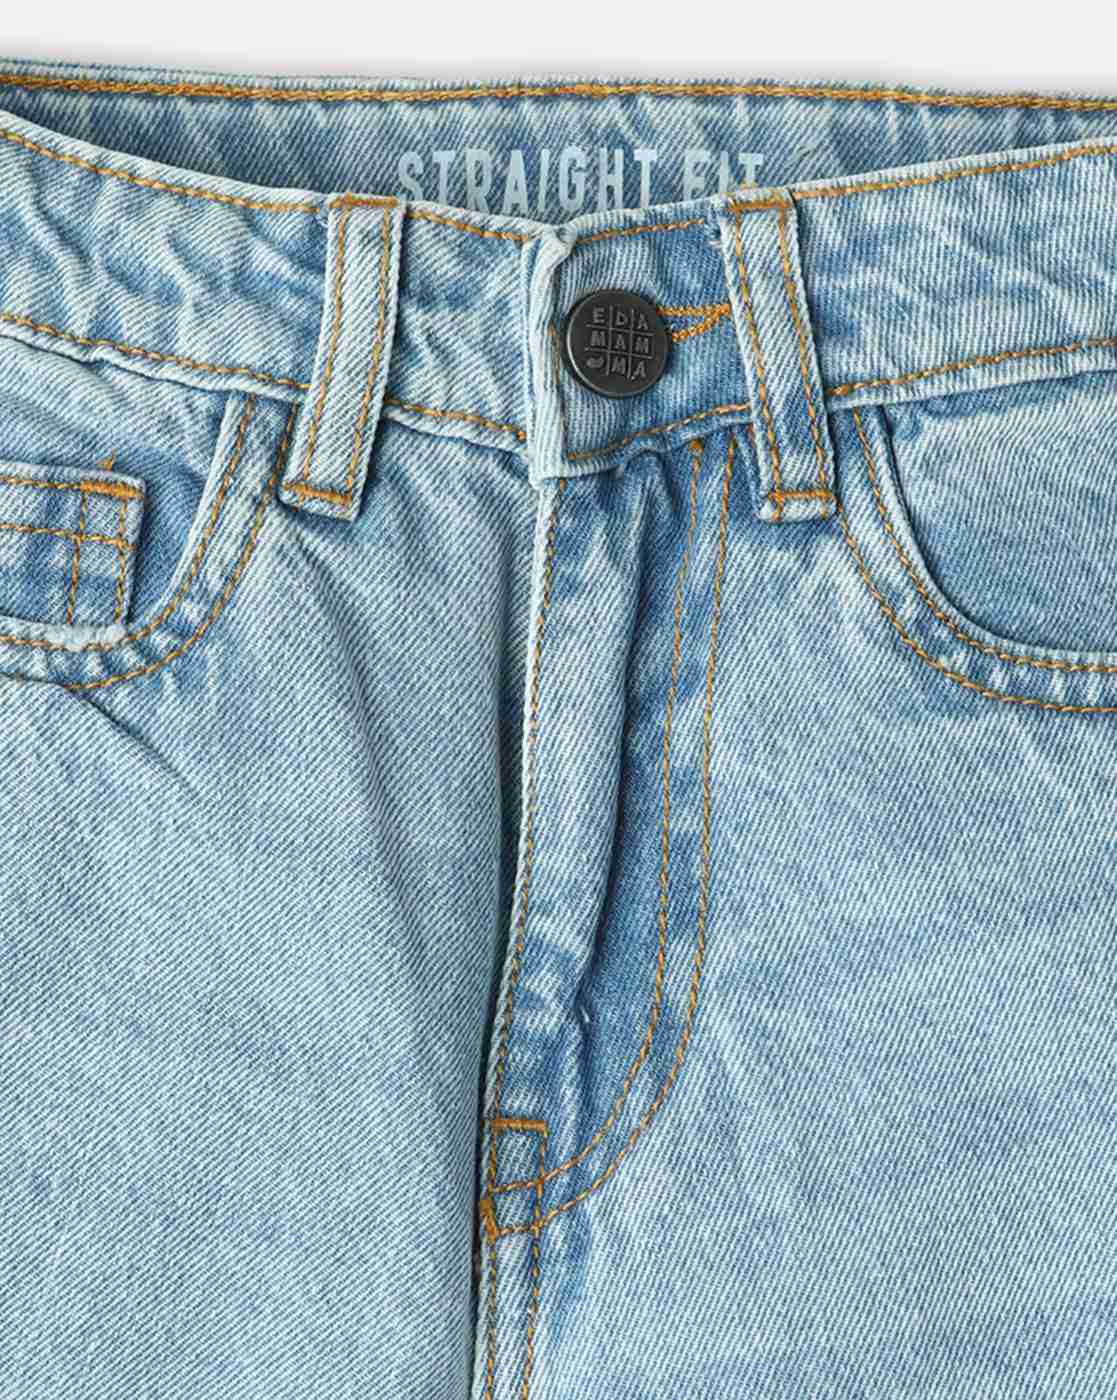 Buy Blue Jeans & Jeggings for Girls by Ed-A-Mamma Online